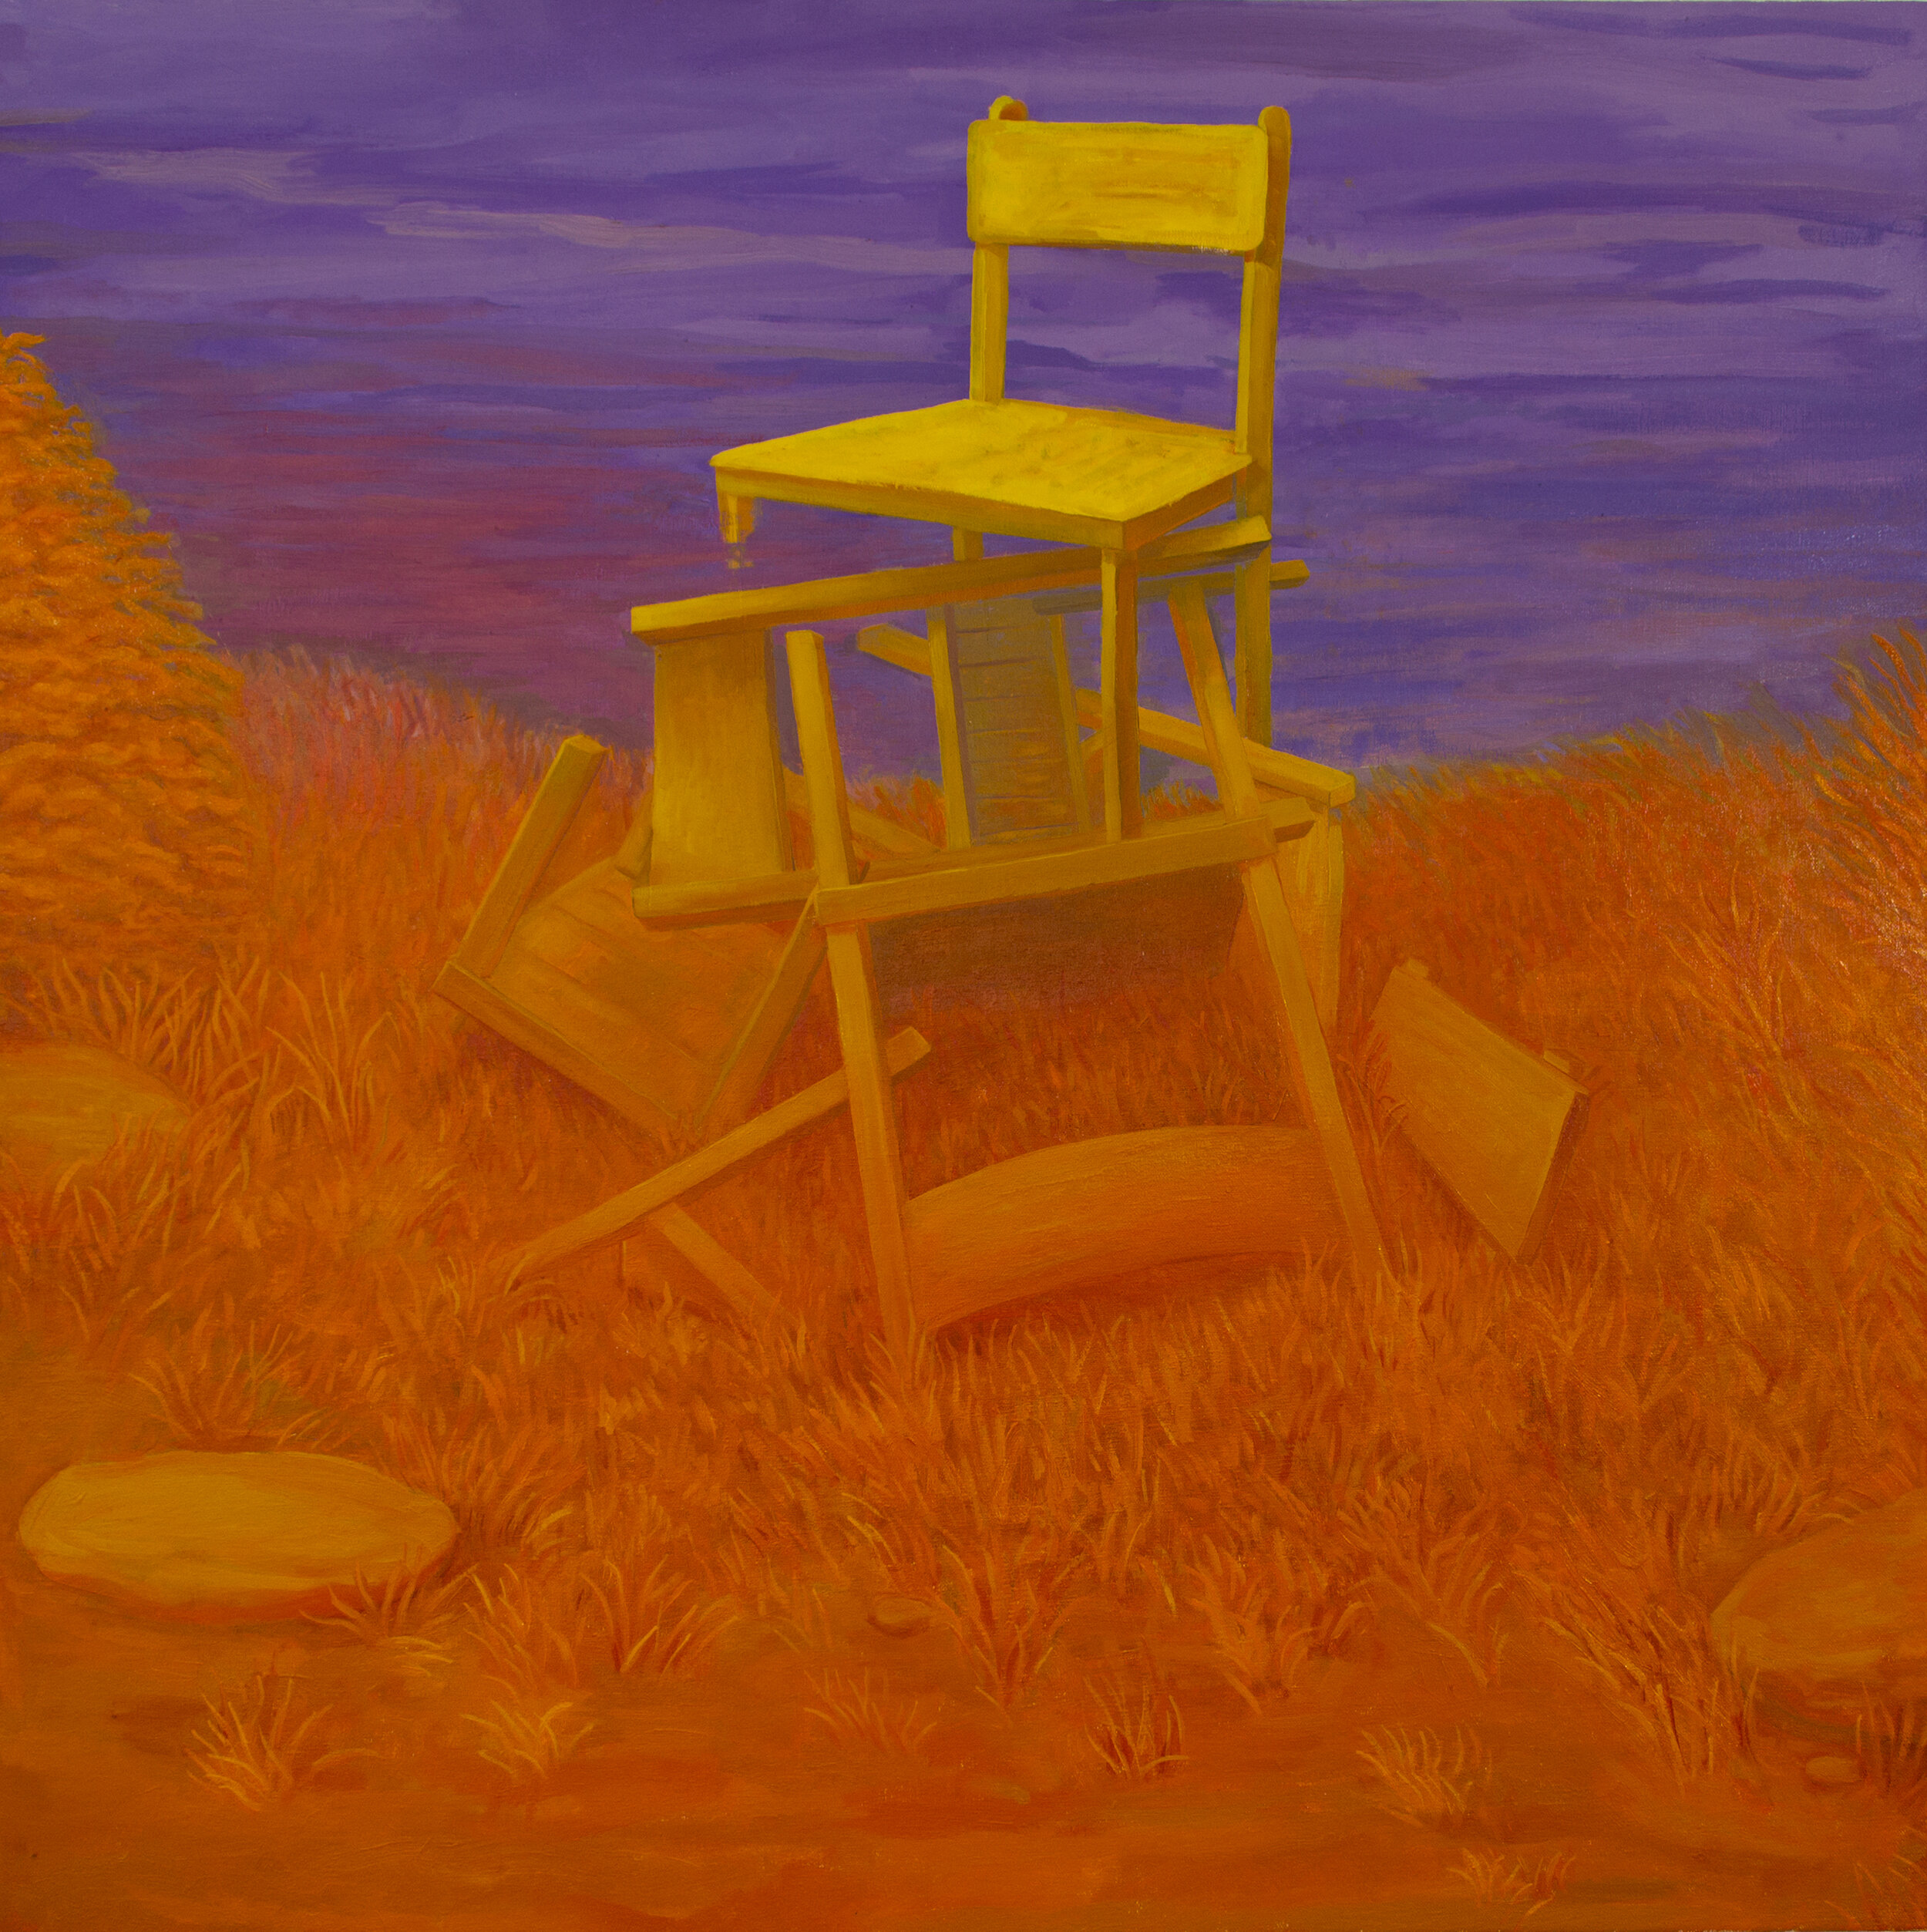  How to build a throne  oil on canvas, 48” x 48”, 2020 